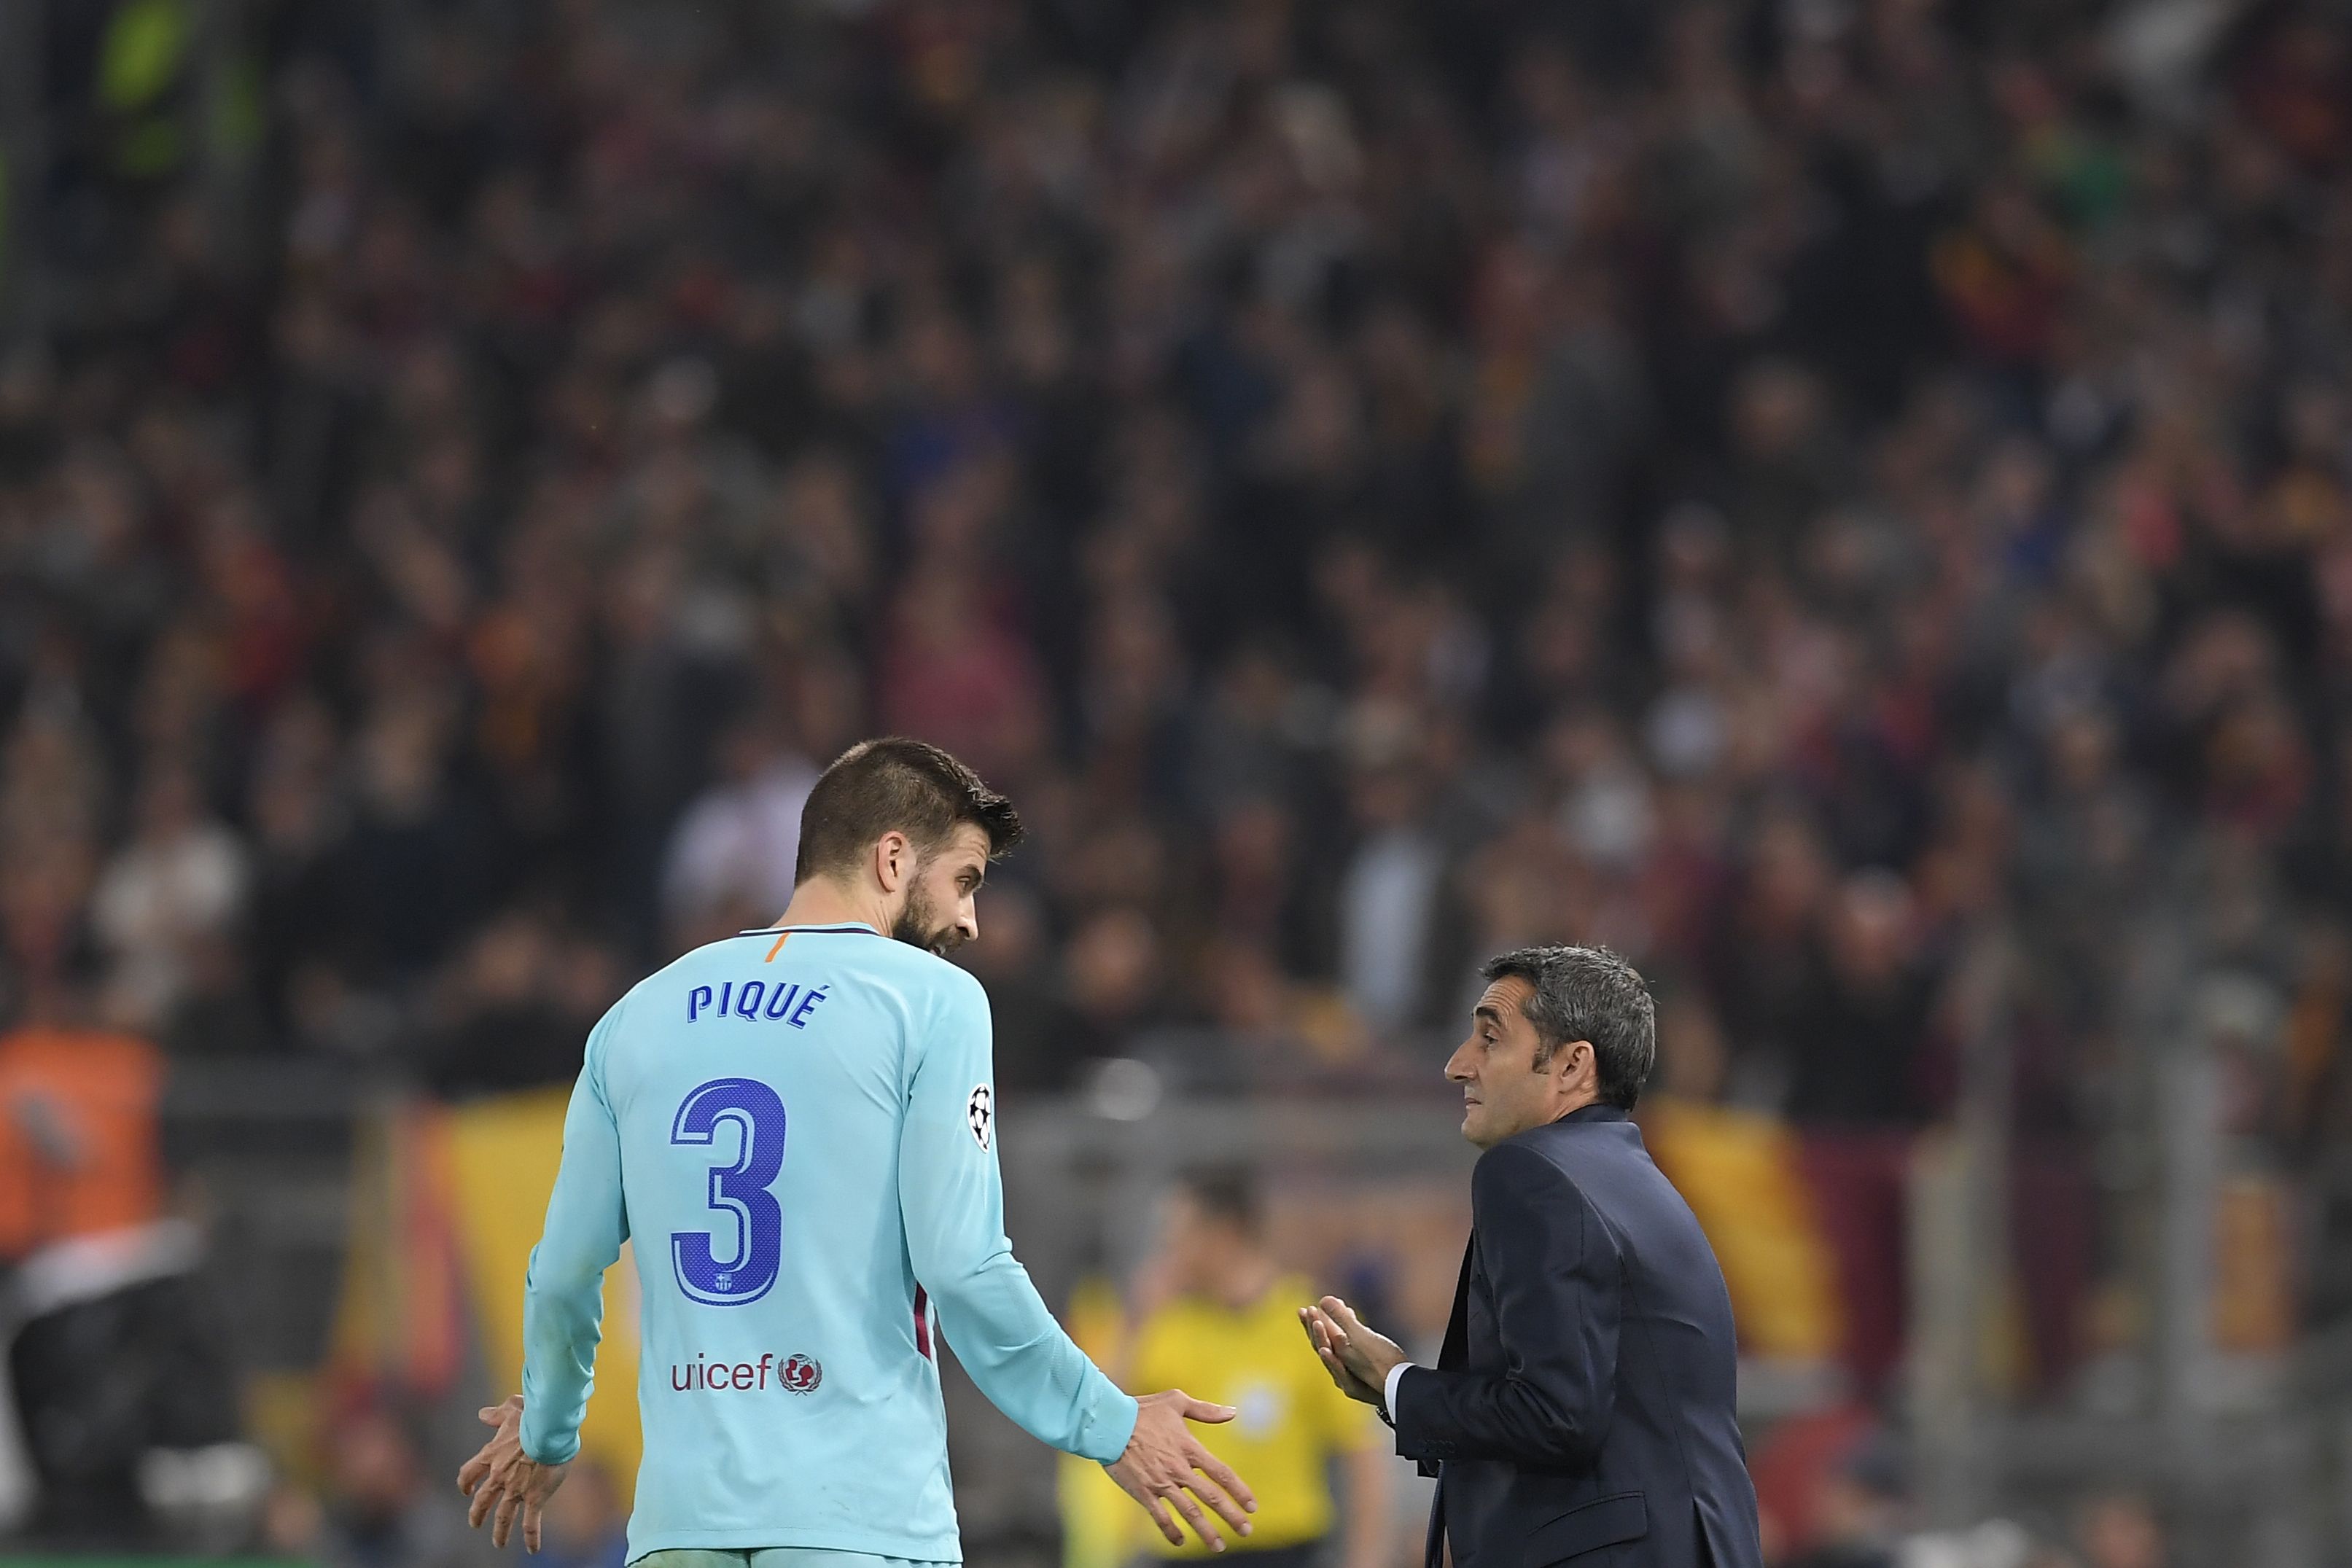 FC Barcelona's Spanish head coach Ernesto Valverde (R) speaks with FC Barcelona's Spanish defender Gerard Pique  during the UEFA Champions League quarter-final second leg football match between AS Roma and FC Barcelona at the Olympic Stadium in Rome on April 10, 2018. / AFP PHOTO / LLUIS GENE        (Photo credit should read LLUIS GENE/AFP/Getty Images)